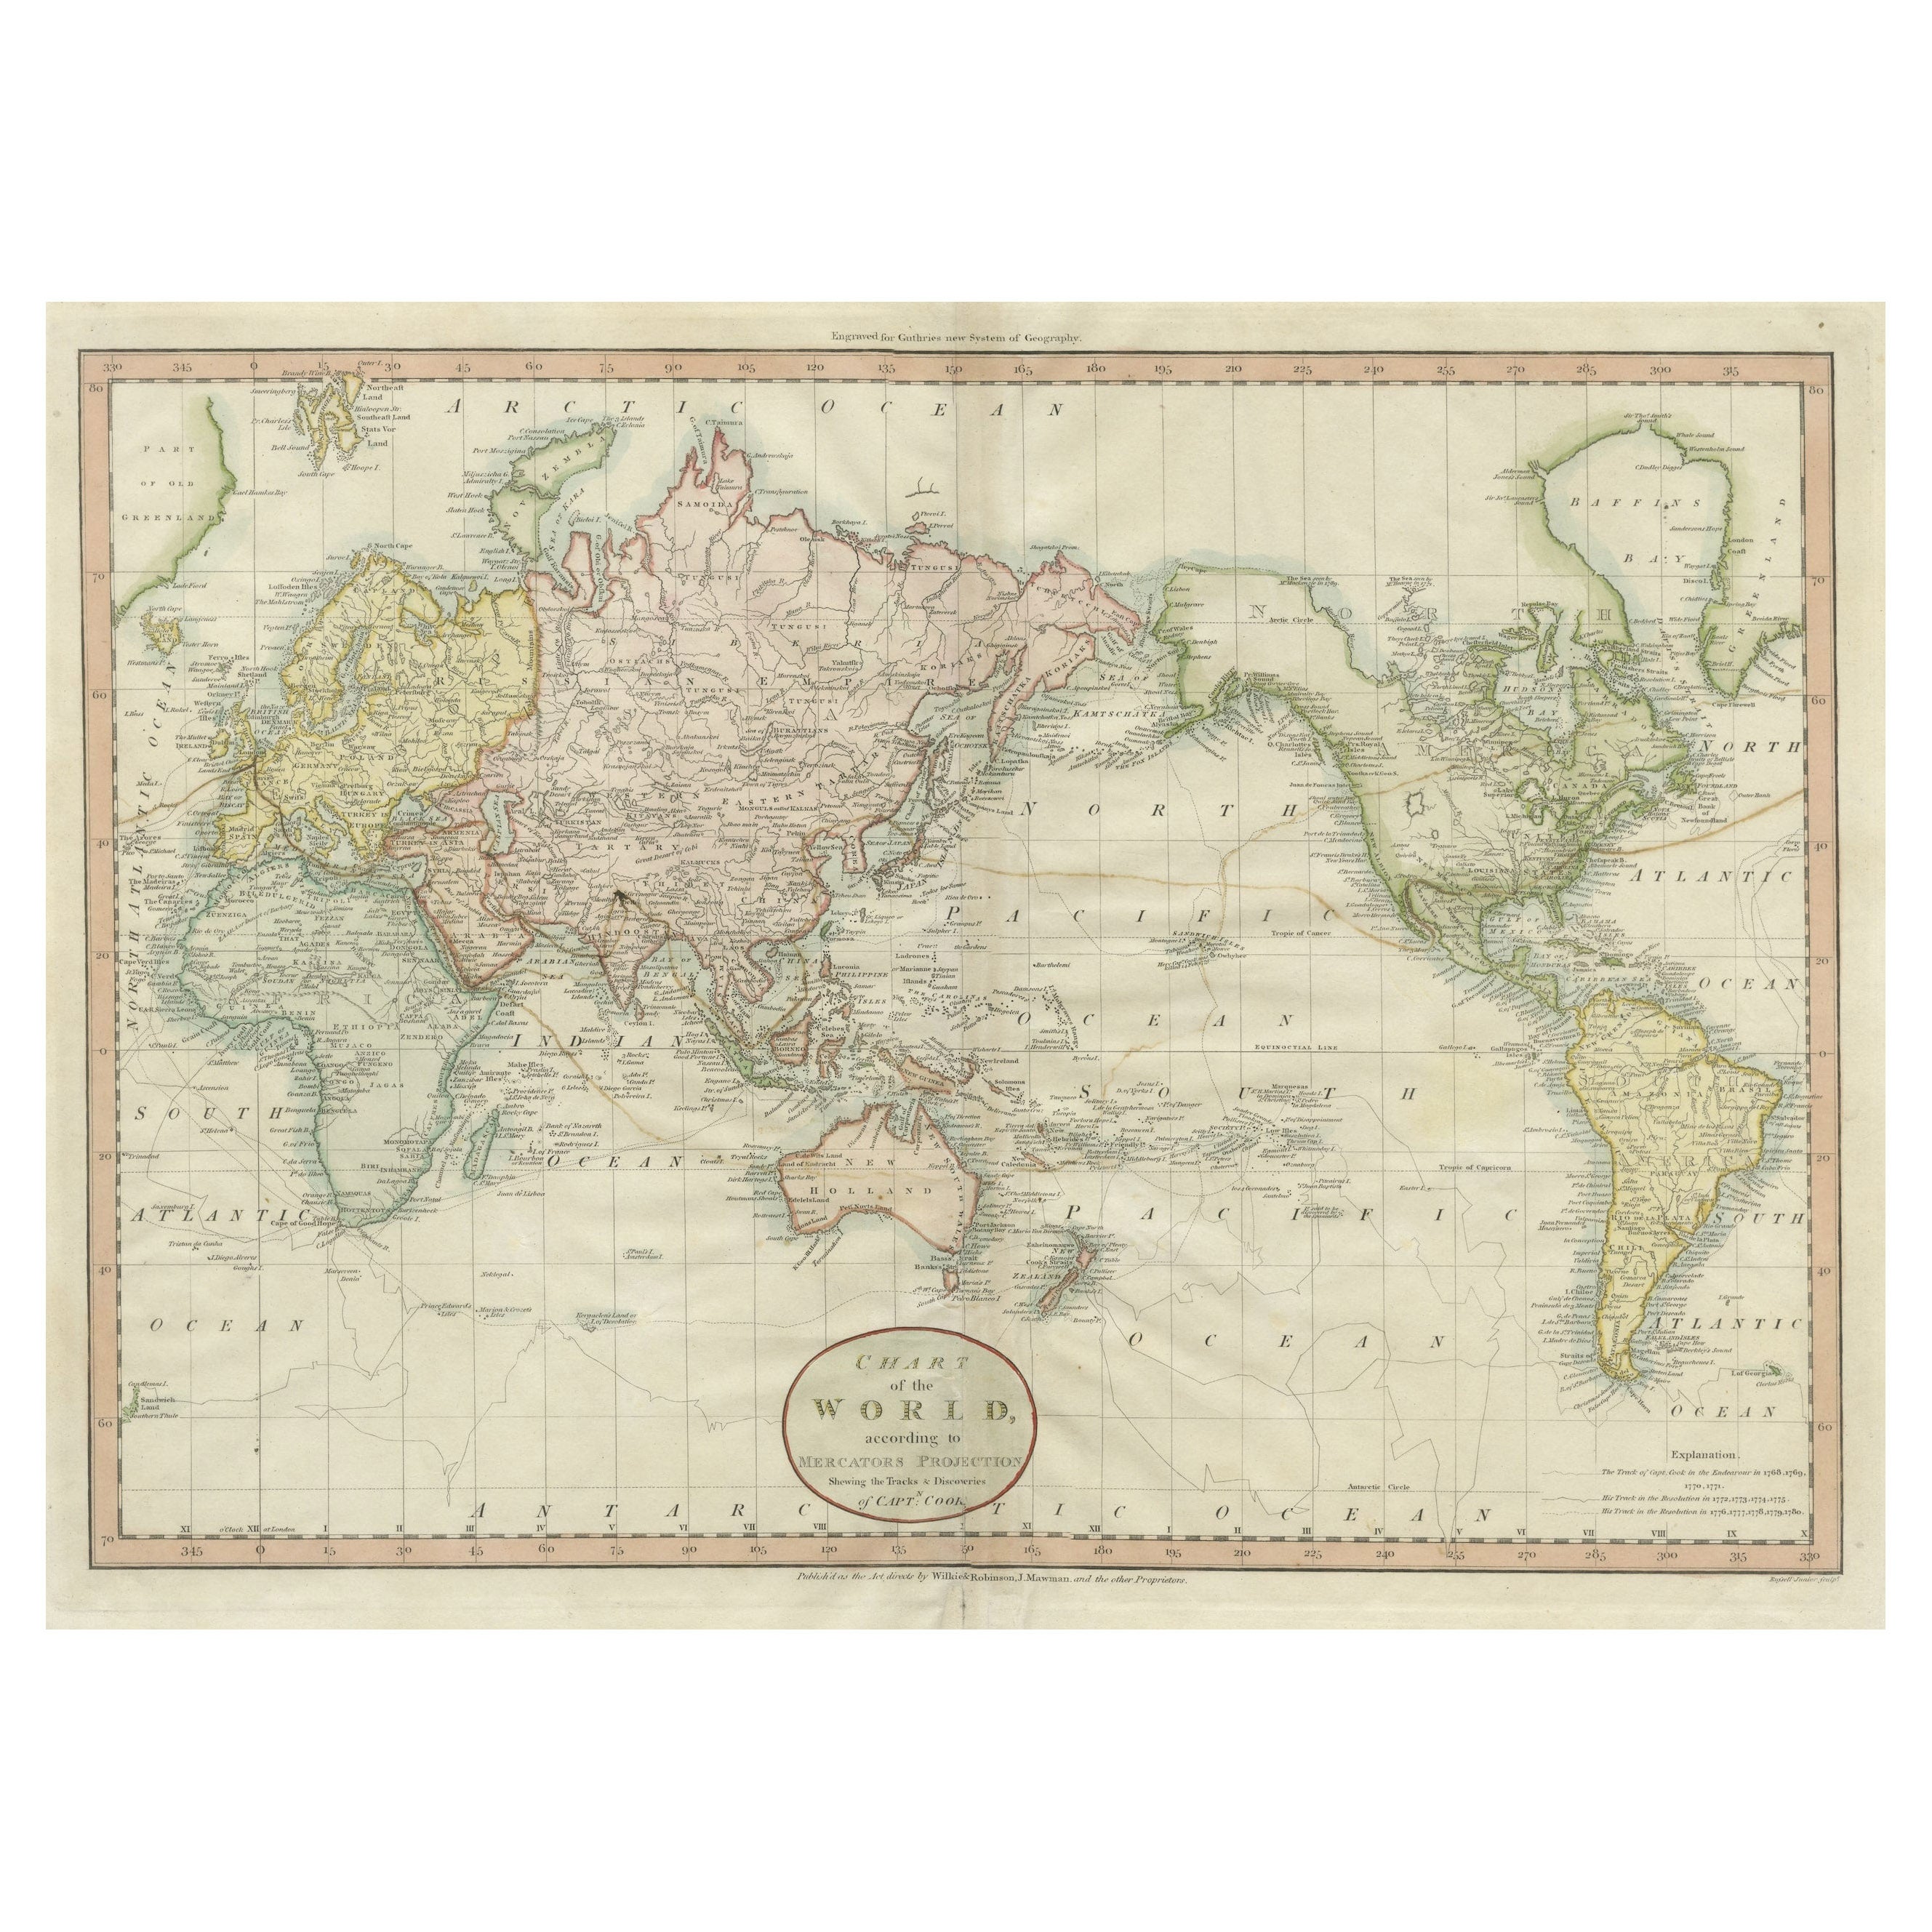 Very Attractive Antique Map of the World as Planisphere, Shows Cook's Voyages